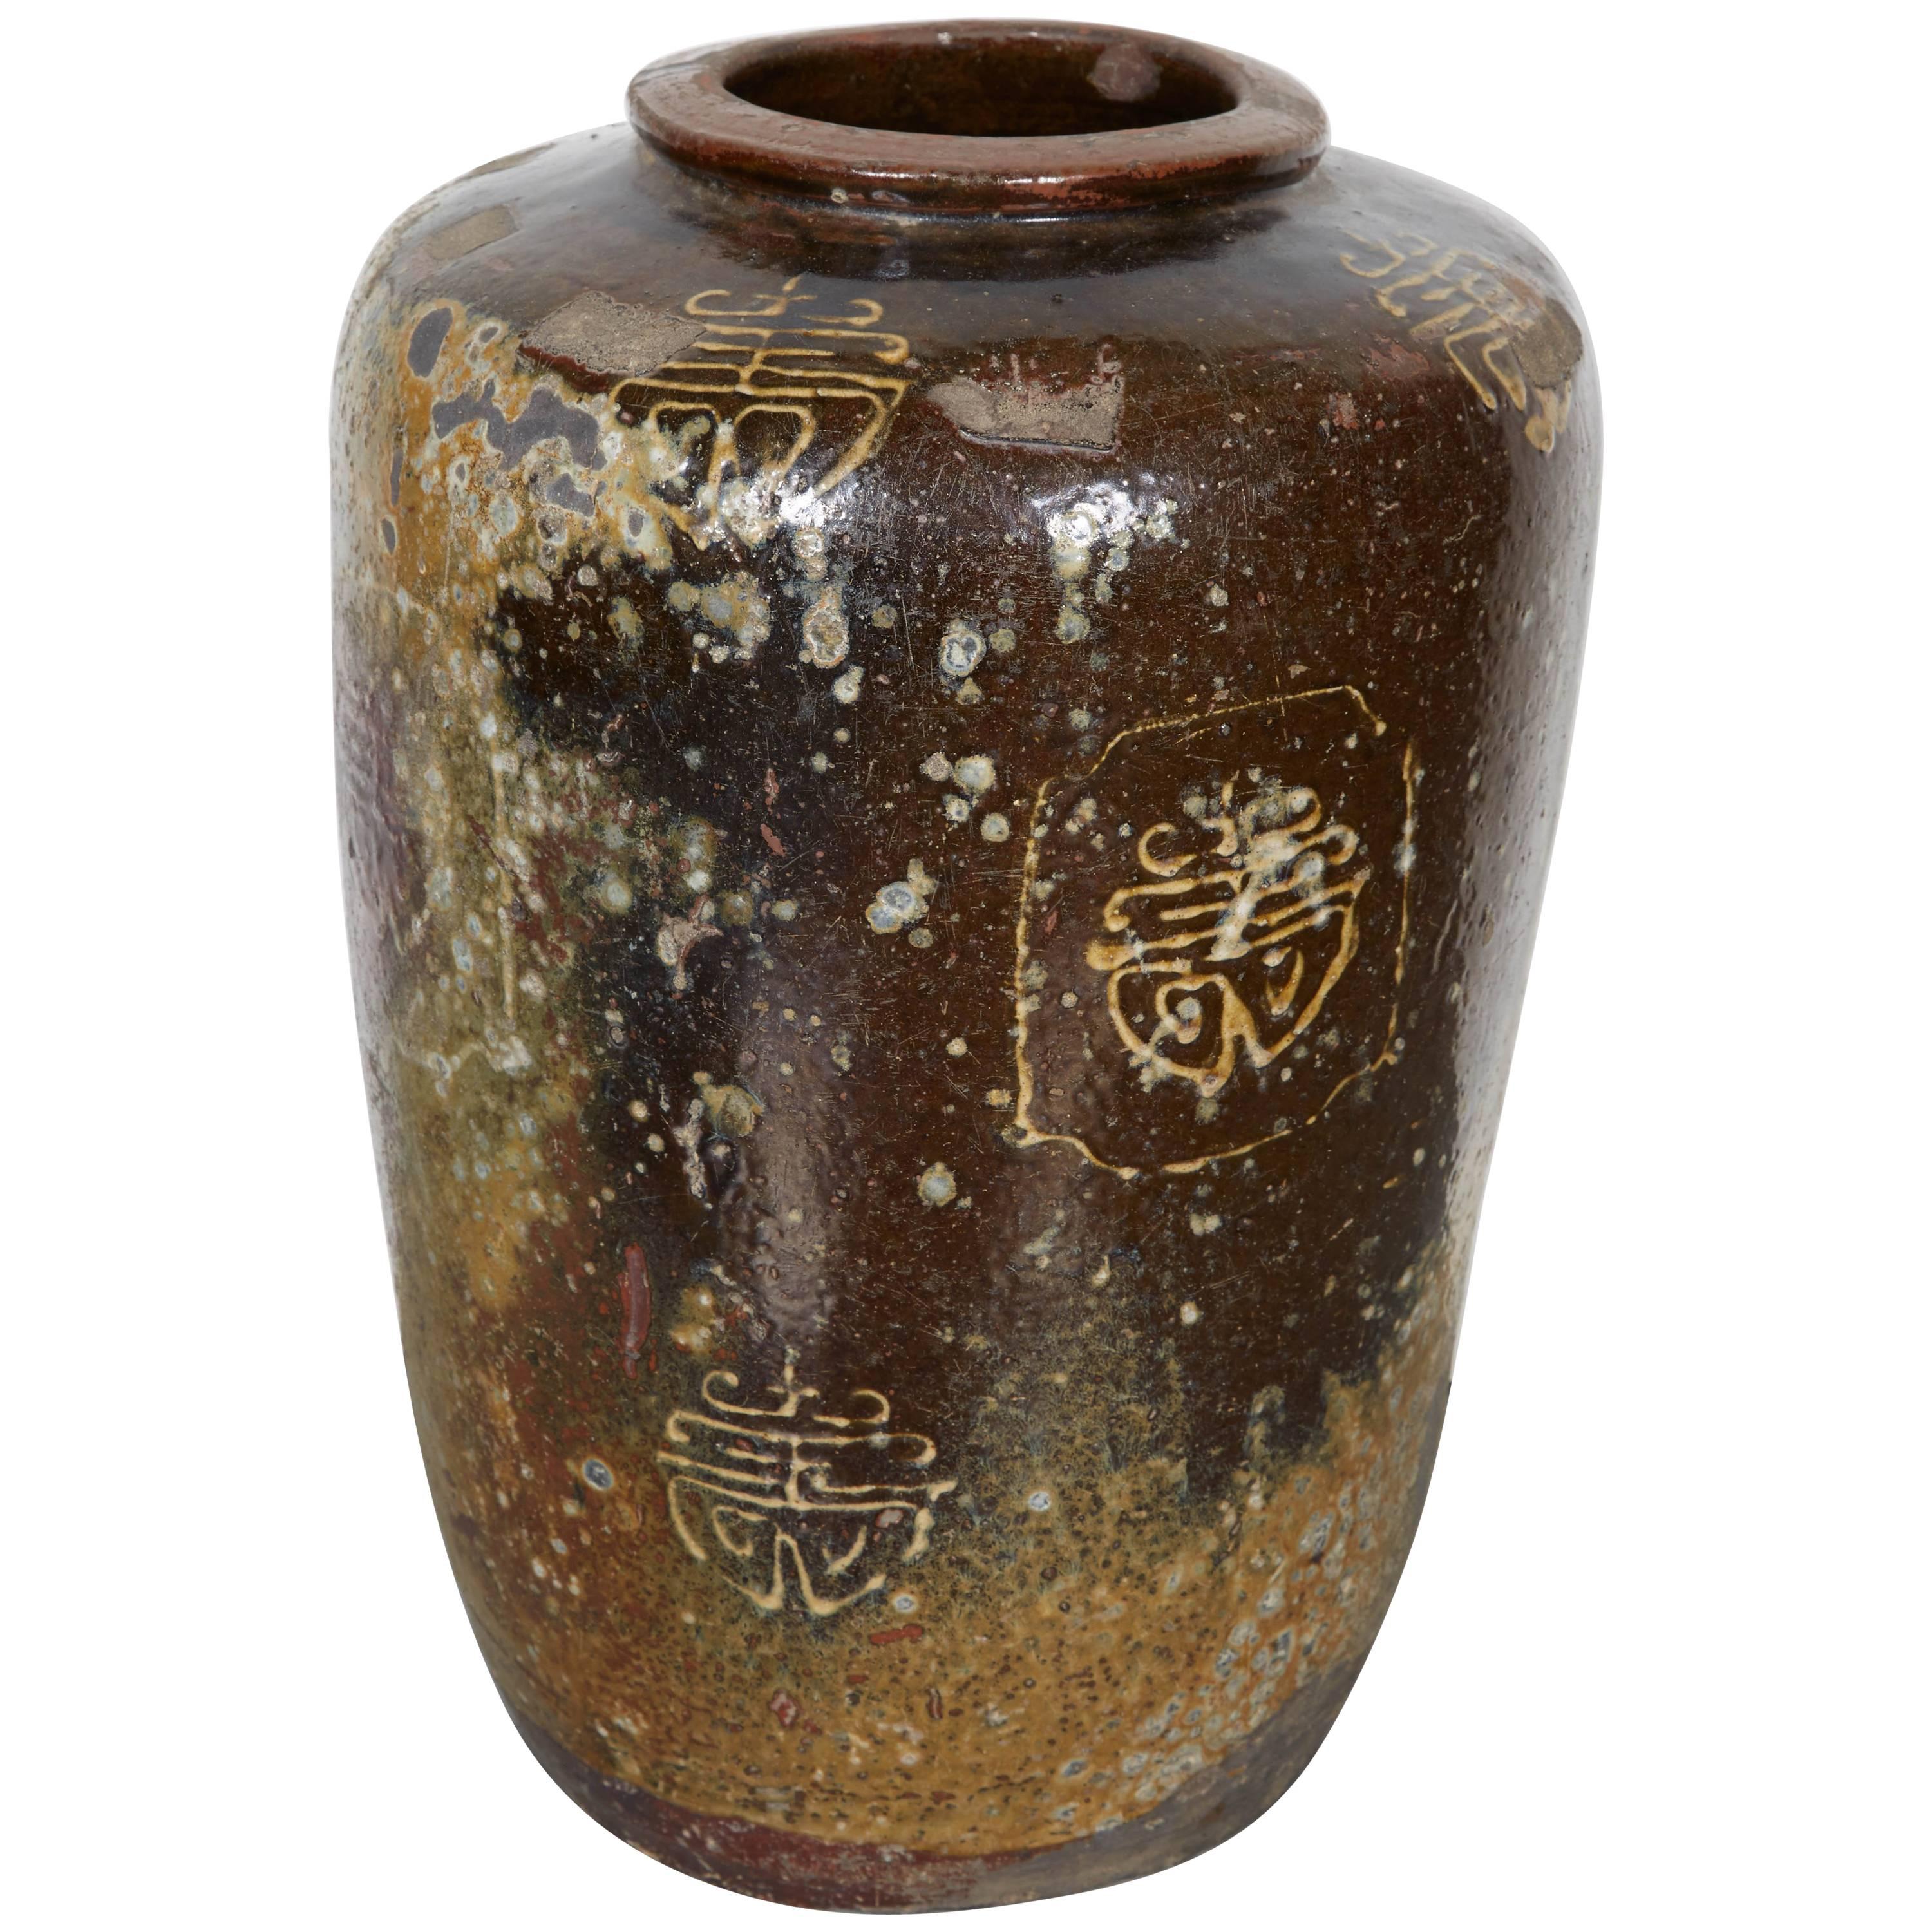 Beautiful Wine Jar With Chinese Characters And Great Patina